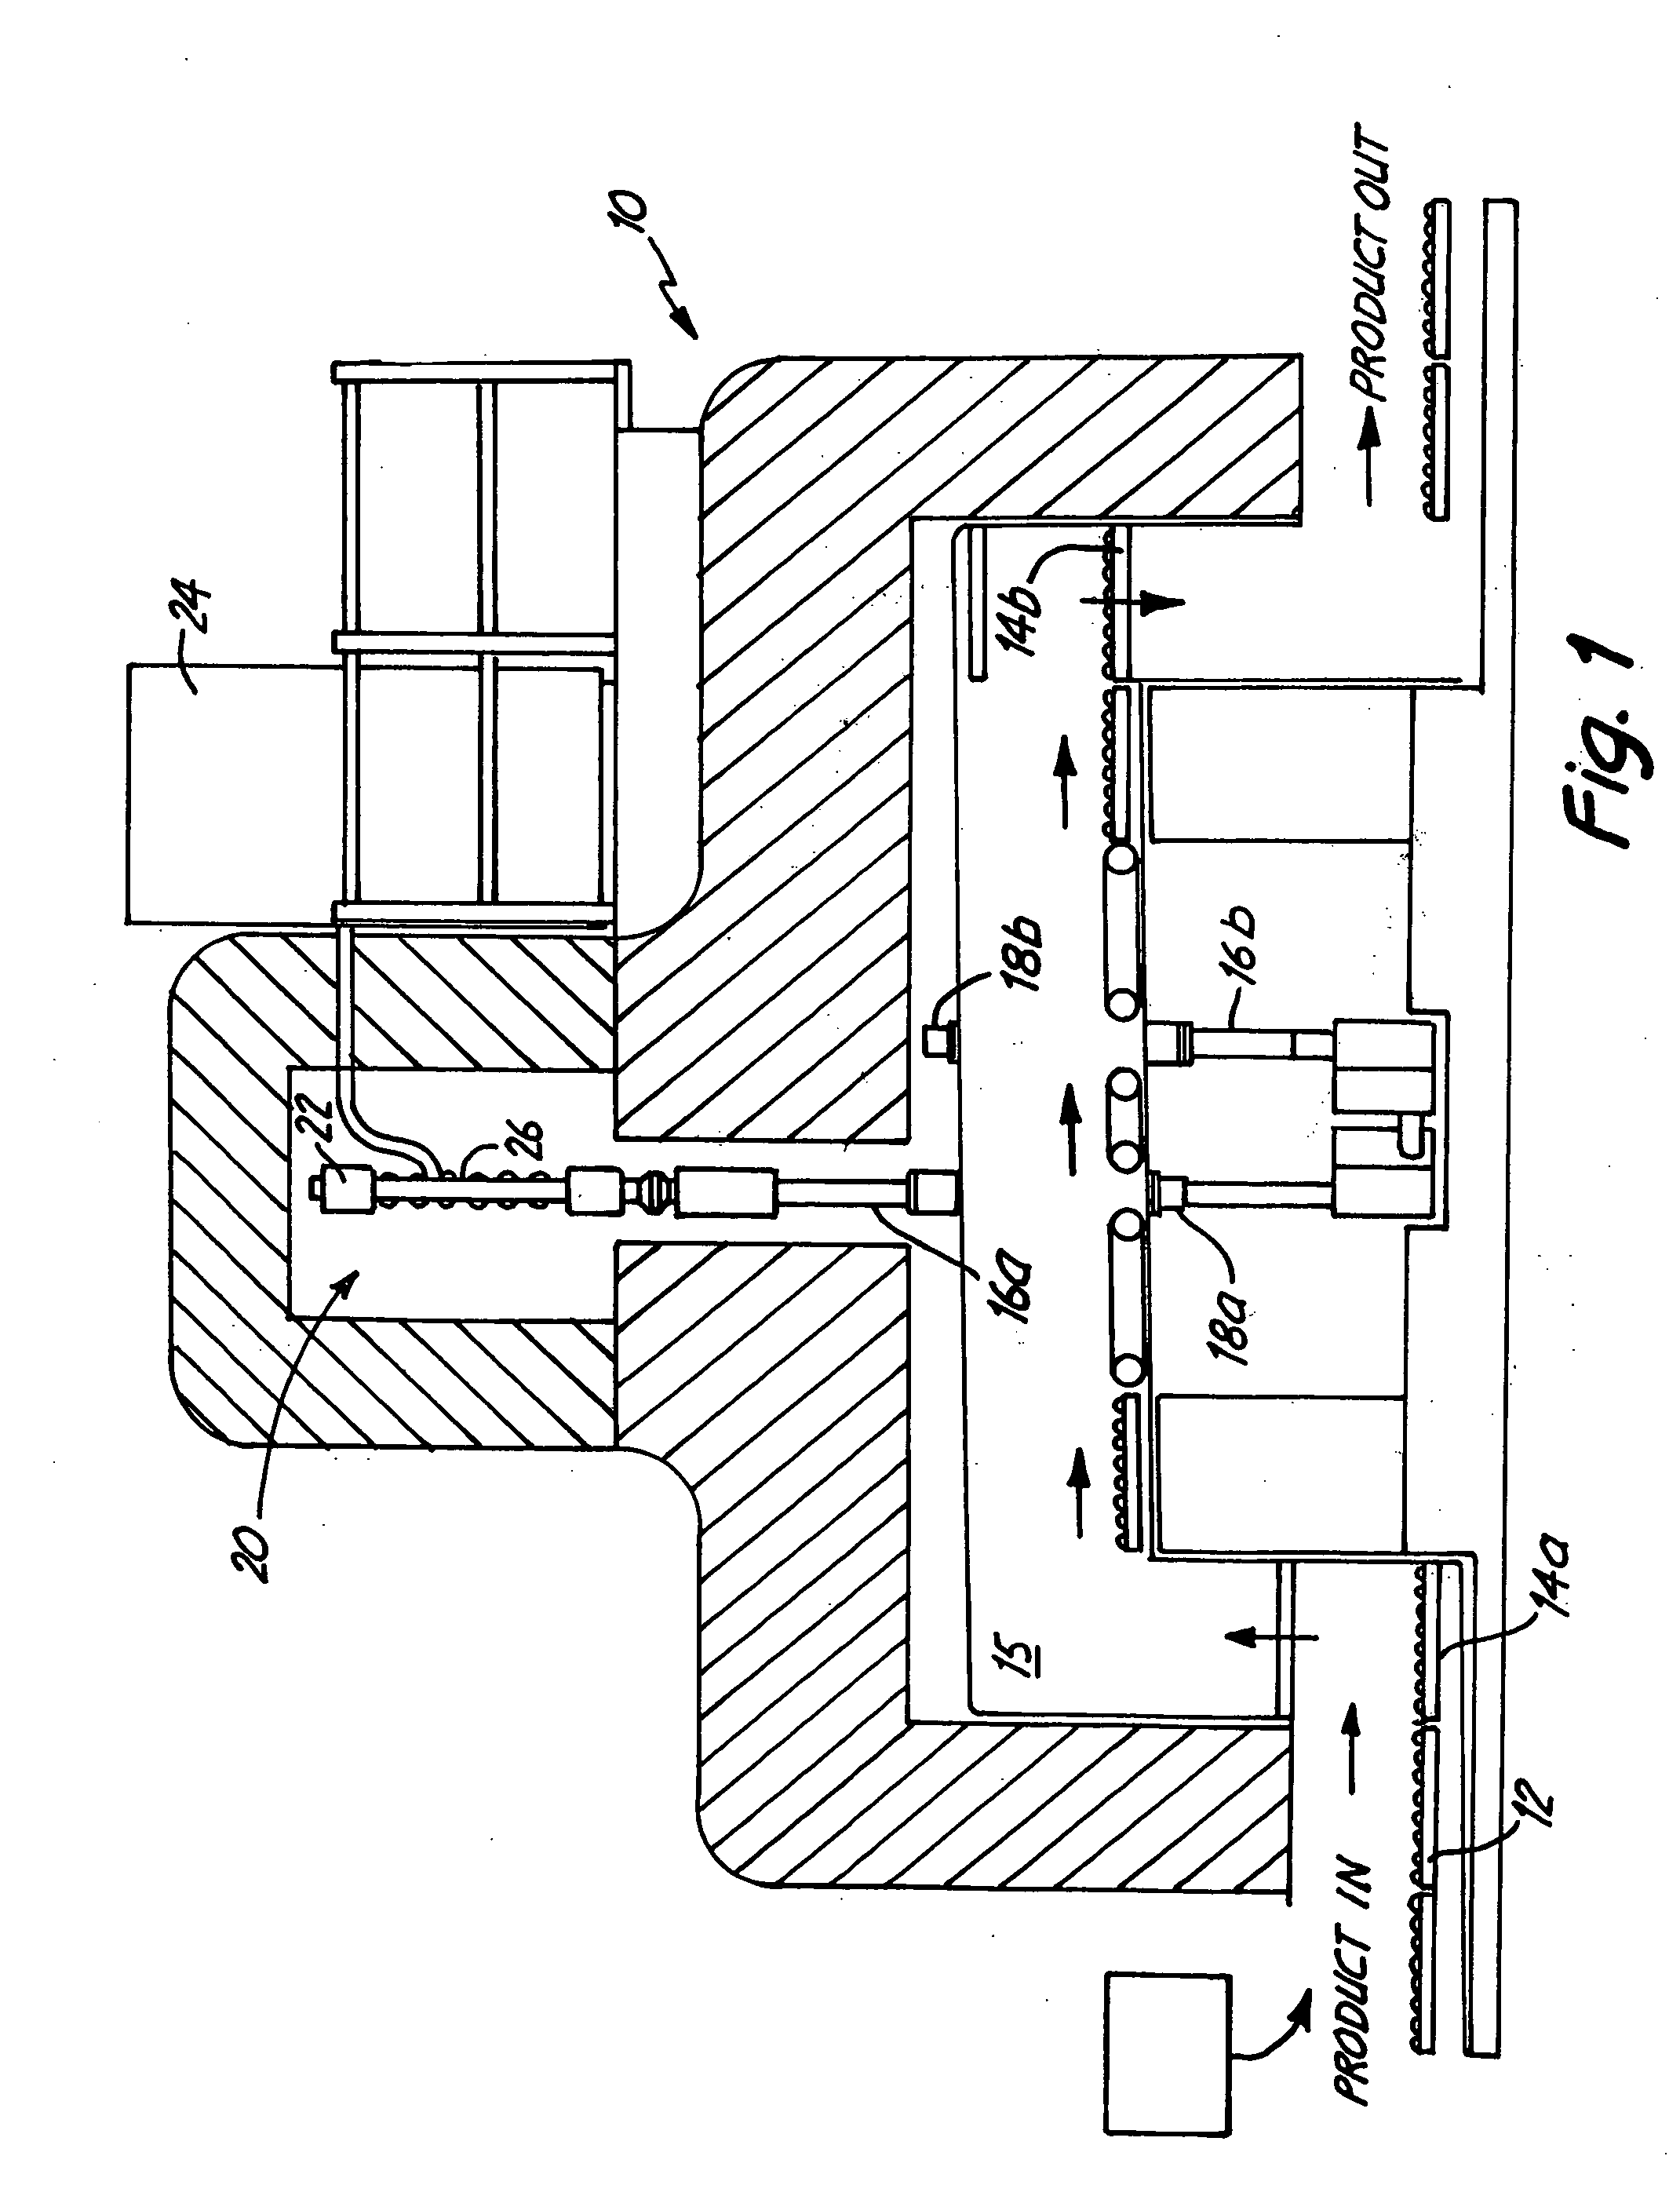 Irradiation system and method